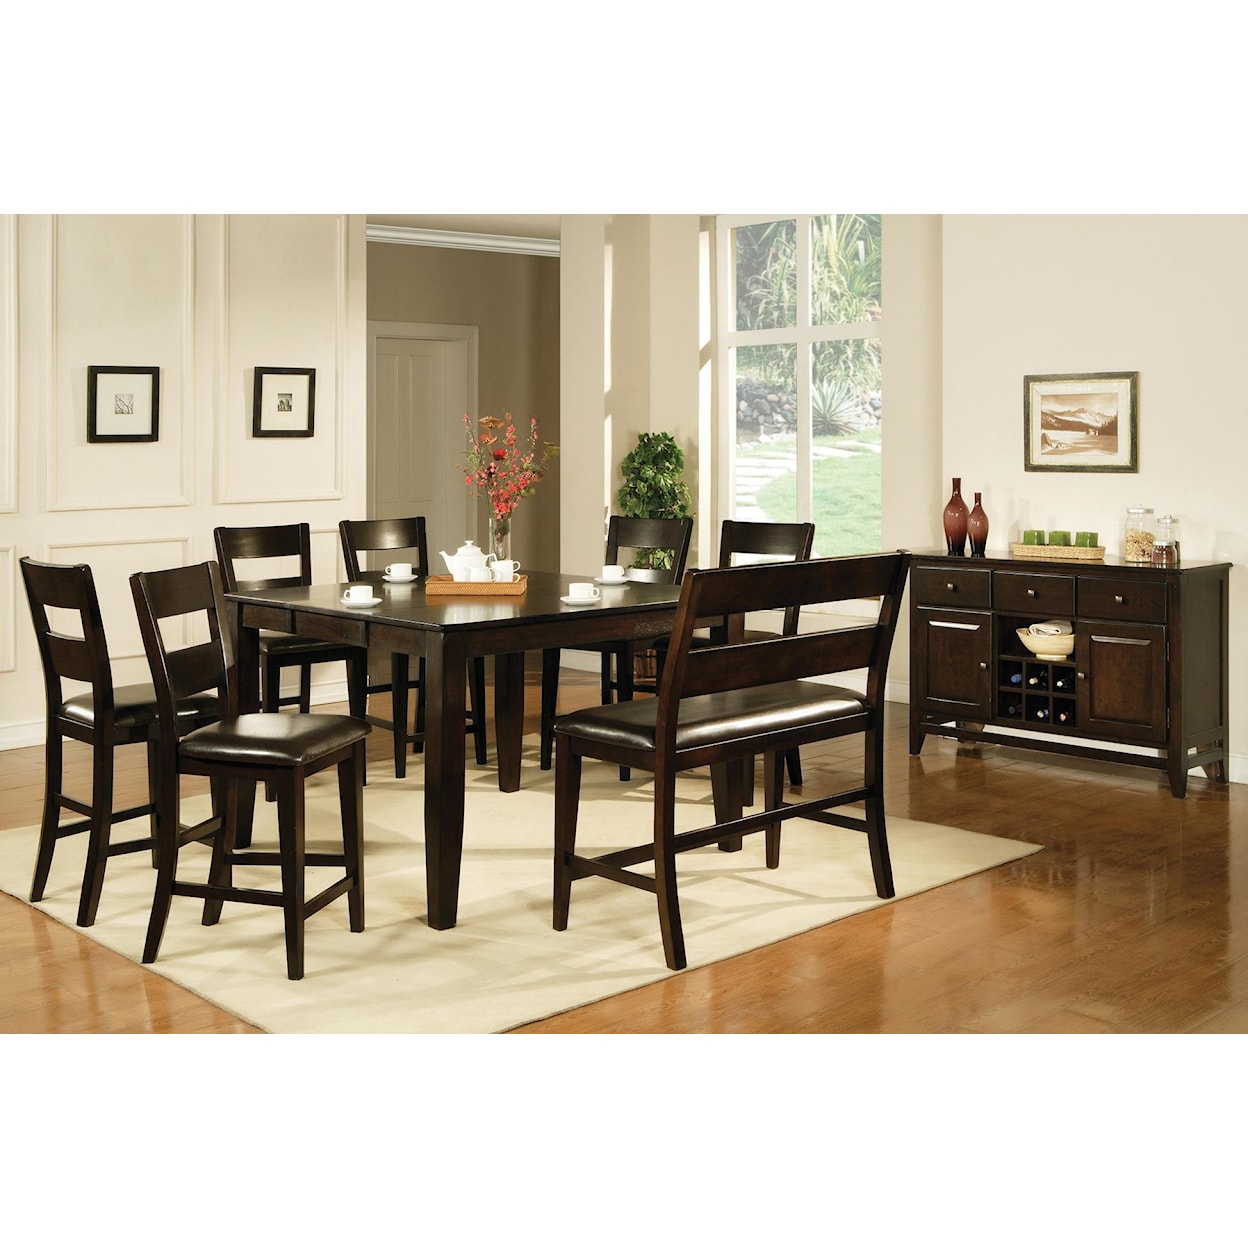 Steve Silver Victoria  Formal Dining Room Group